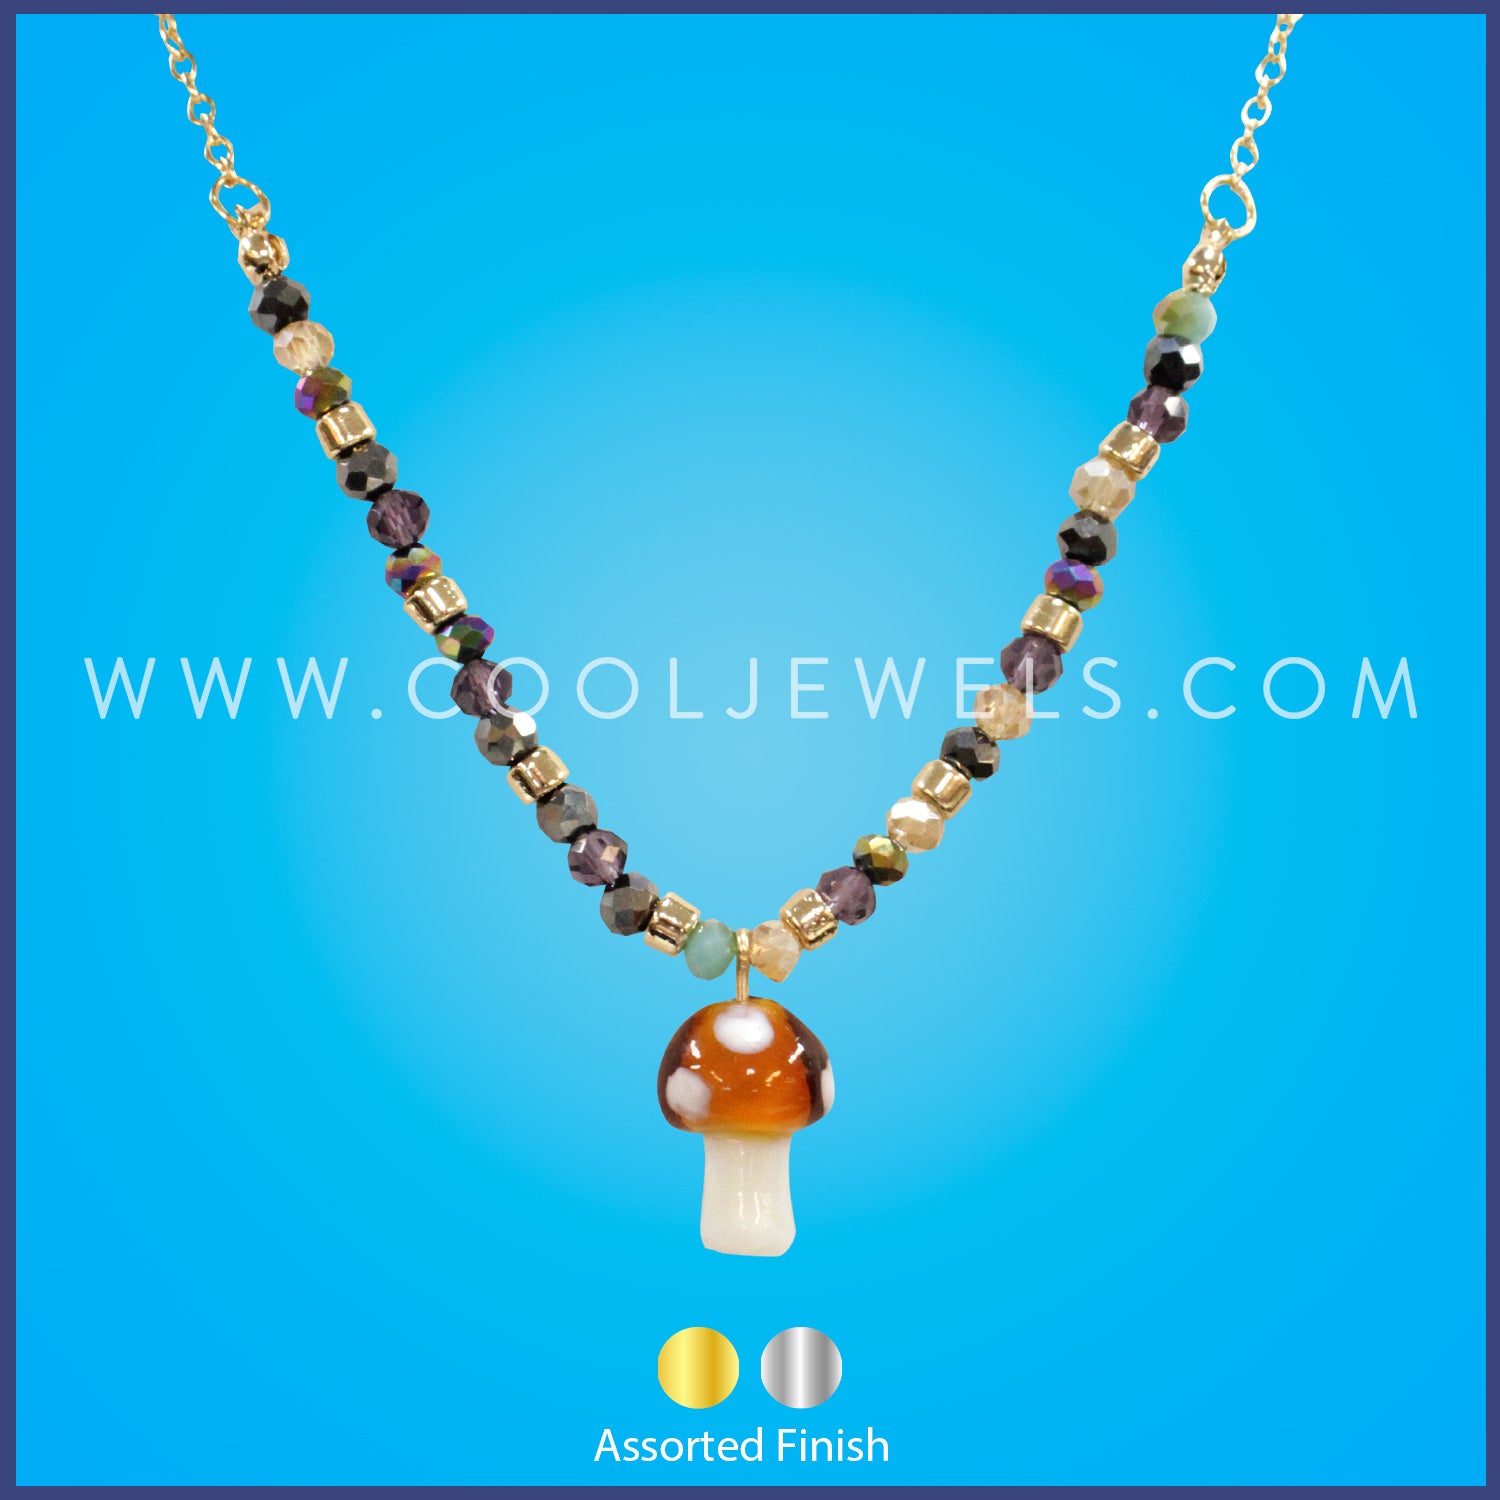 CHAIN NECKLACE WITH COLORED BEADS & BROWN & WHITE MUSHROOM PENDANT - ASSORTED